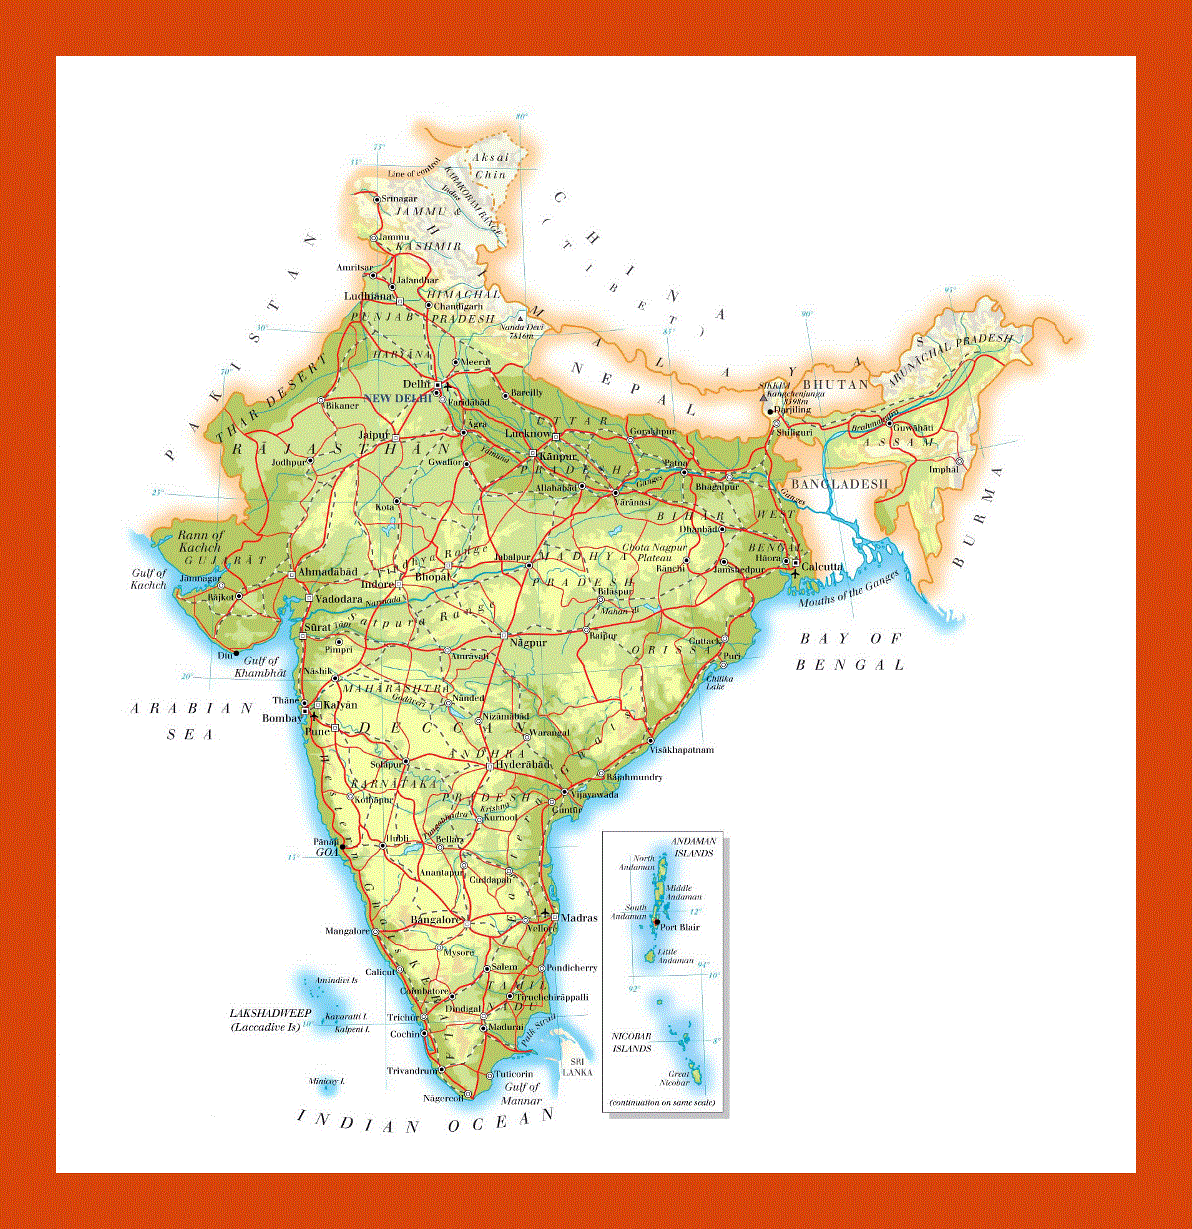 Elevation map of India